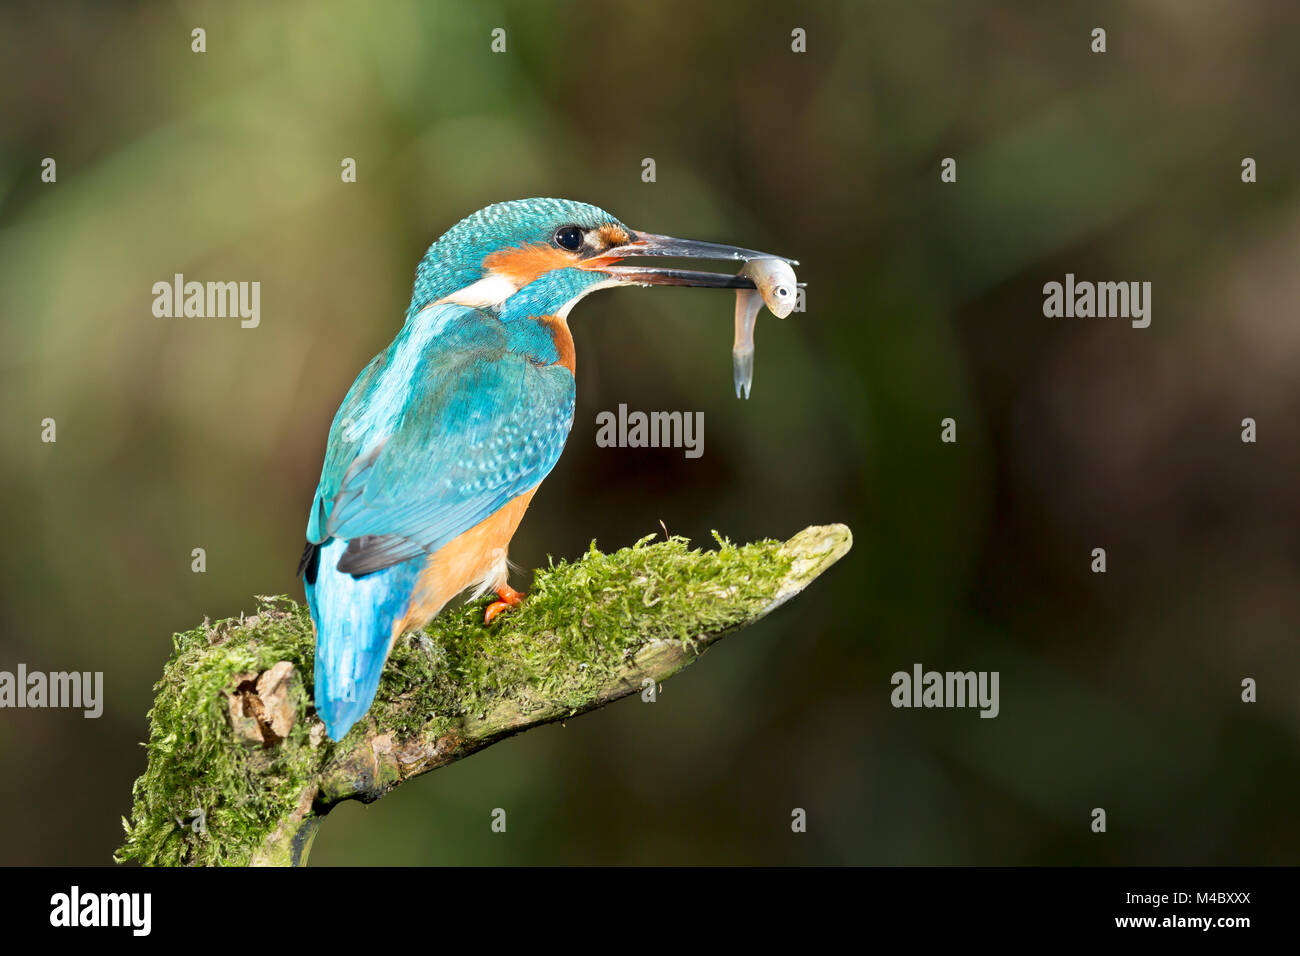 Common kingfisher (Alcedo atthis) with fish as prey,sits on mossy branch,North Rhine-Westphalia,Germany Stock Photo